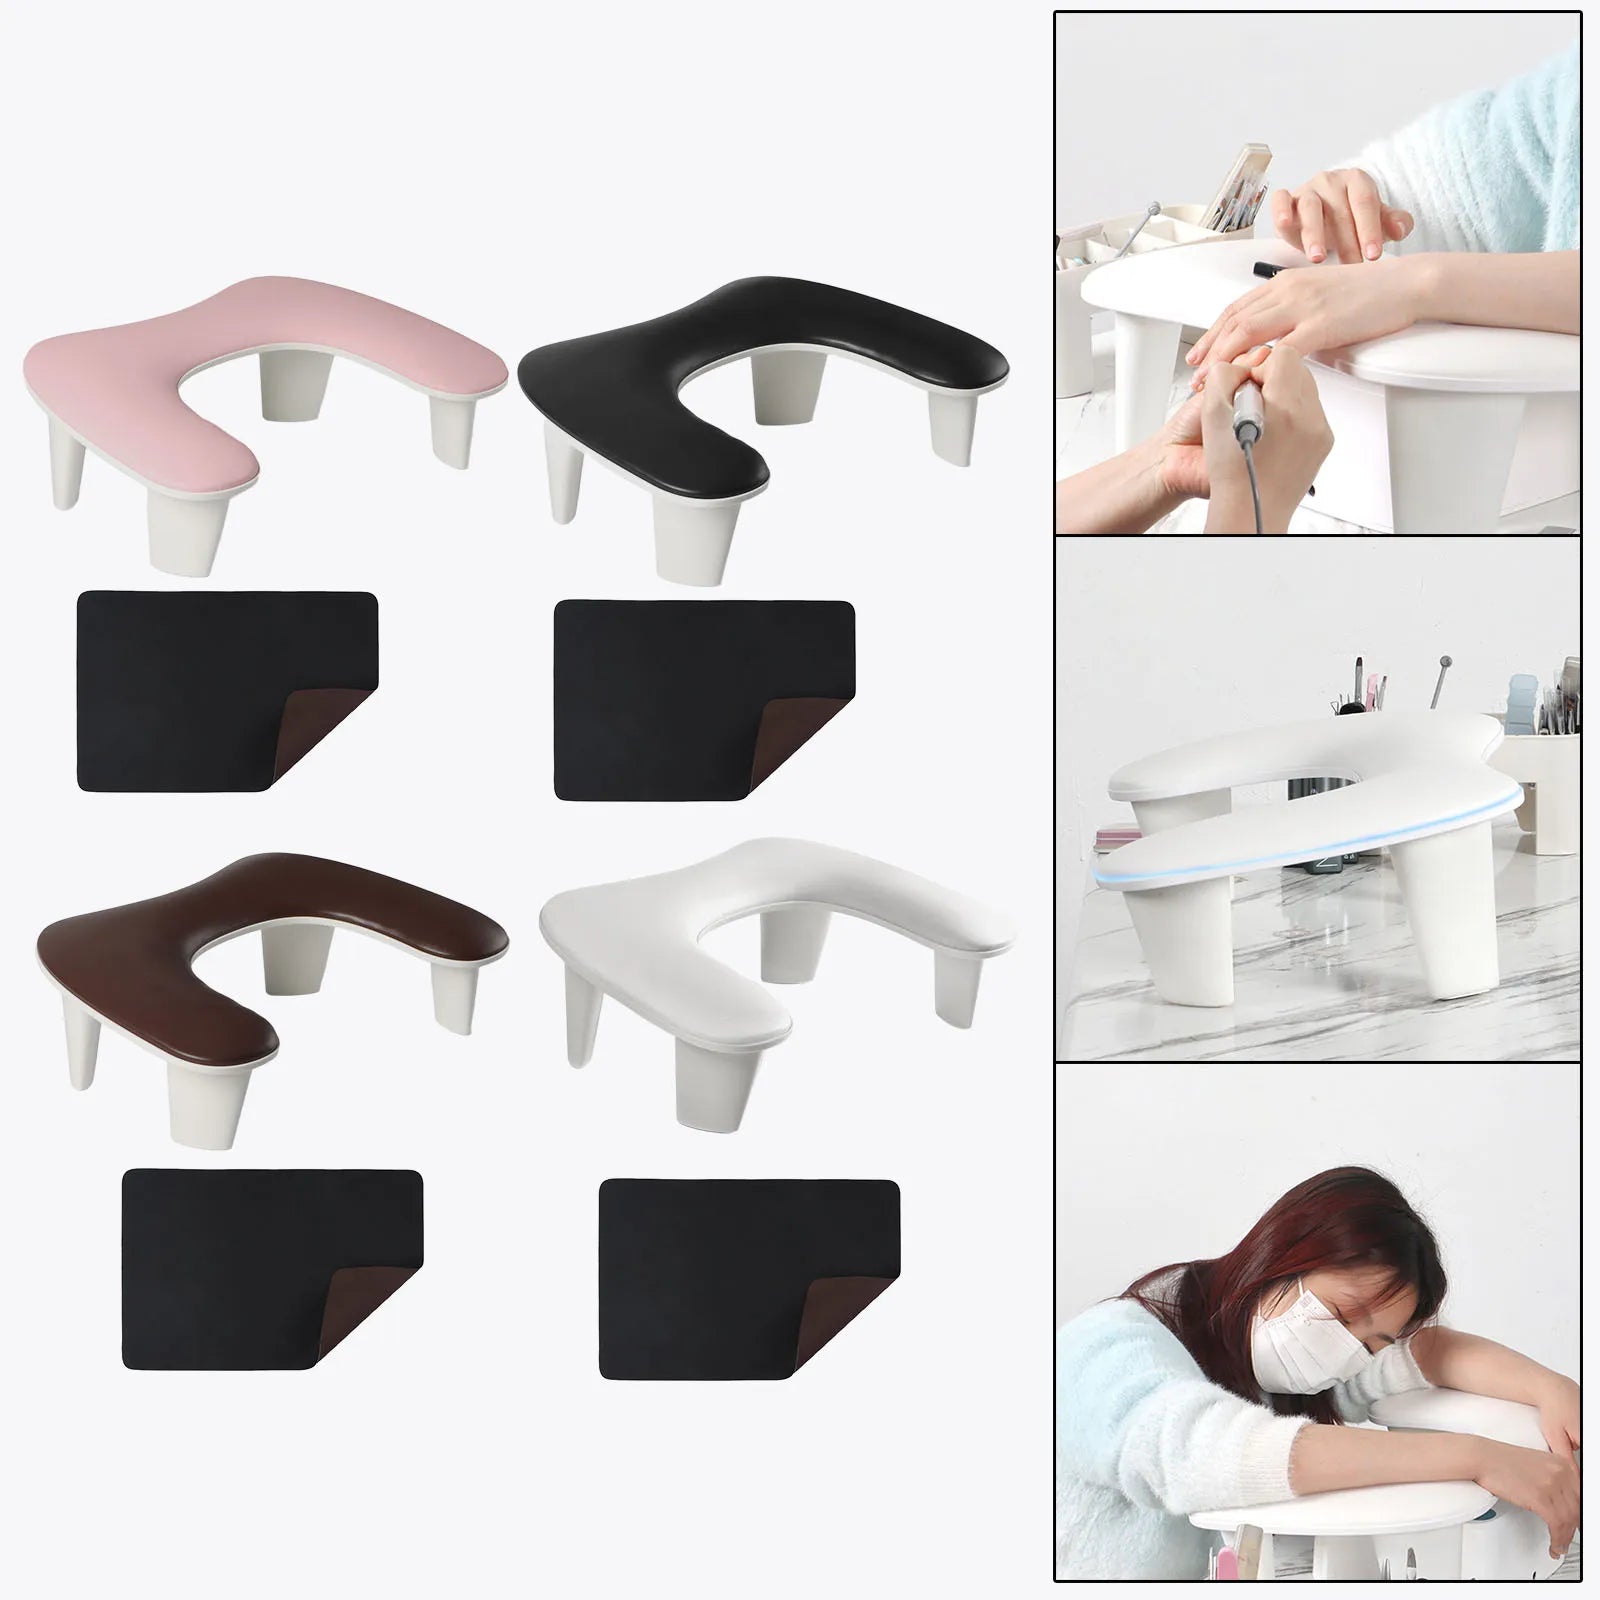 Manicure hand pillow resting table arm rest pillow suitable for two hands nail art nail salon nail furniture multiple colors